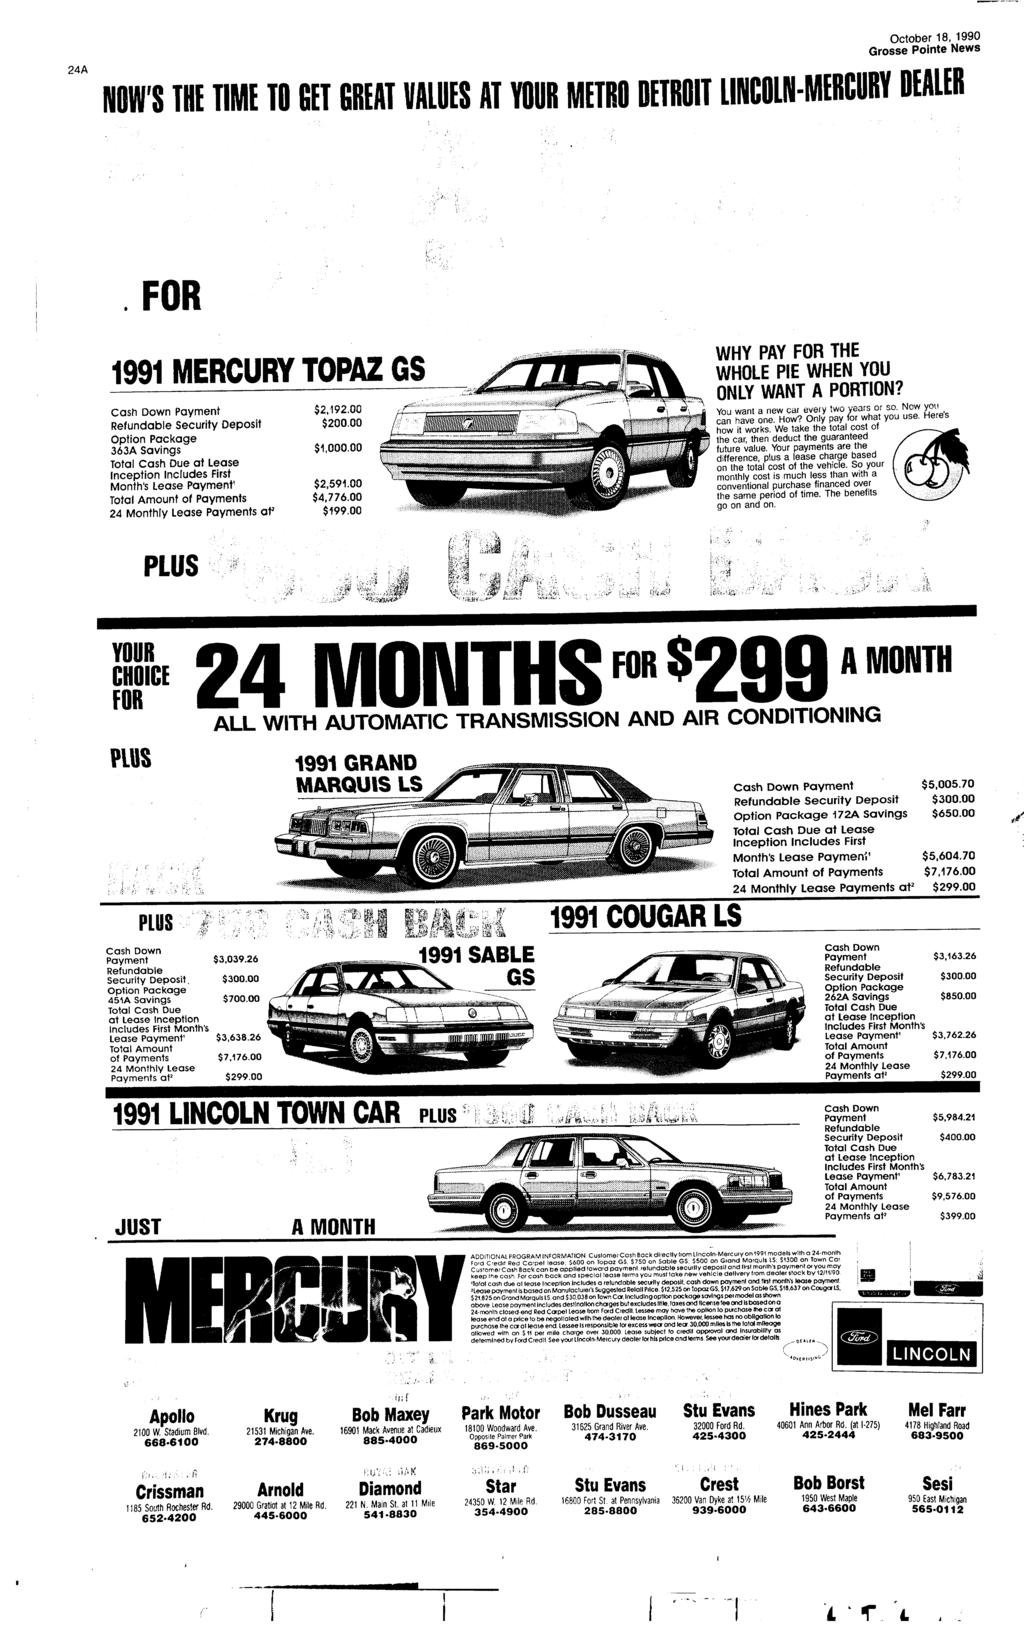 24A NOW'S THE TME TO GET GREAT VALUES AT YOUR METRO DETROT LNCOLN-MERCURY DEALER FOR 1991 MERCURY TOPAZ GS Cash Down Payment Refundable Security Deposit Option Package 363A savings Total Cash Due at